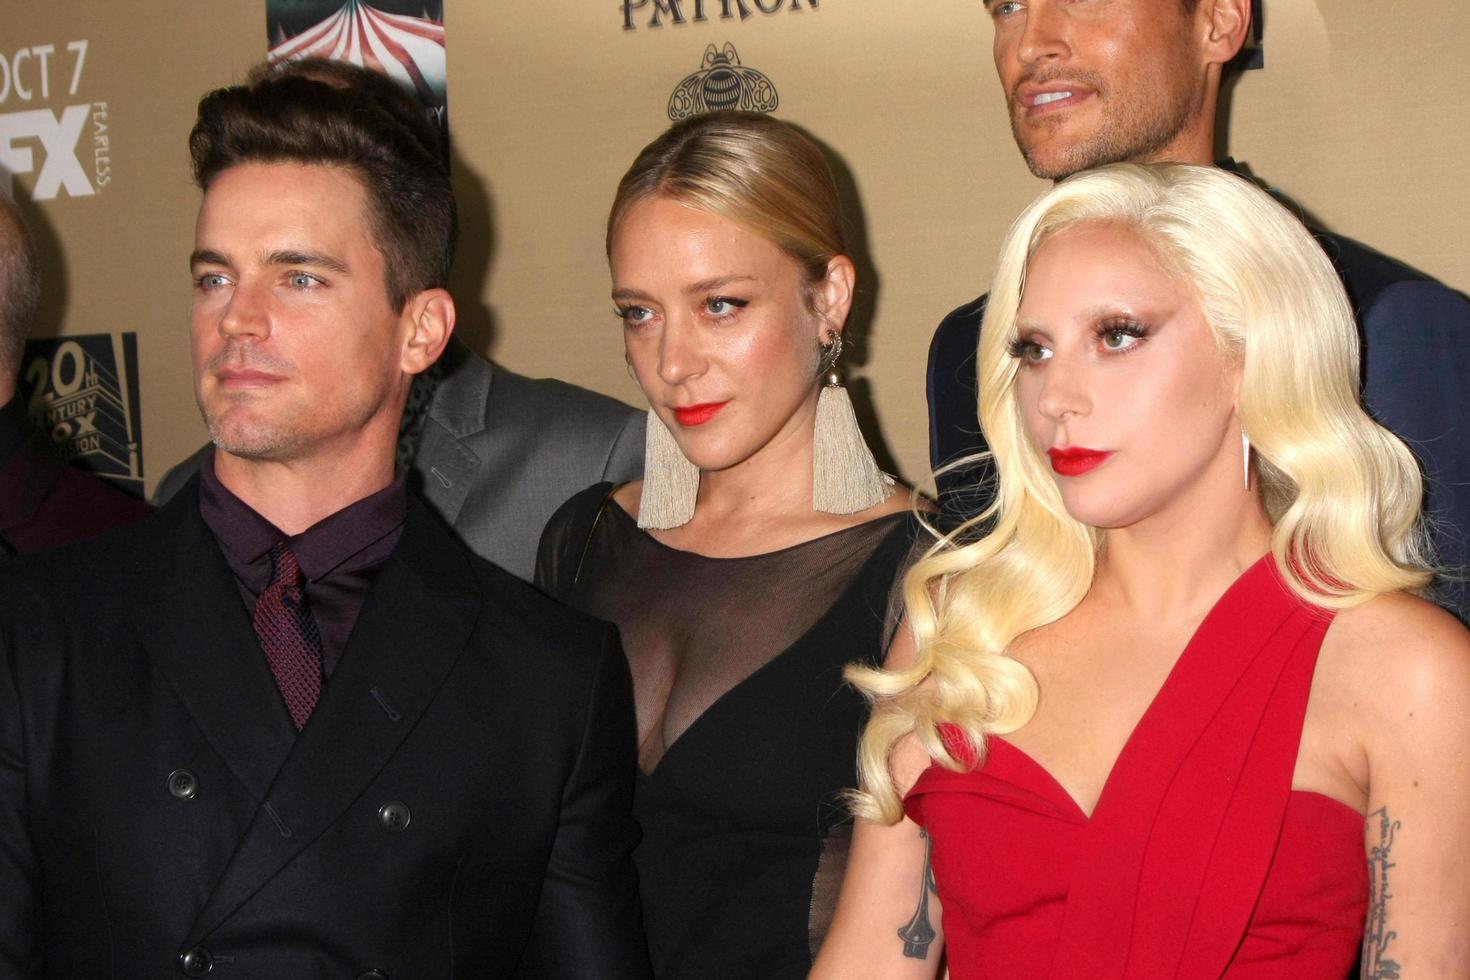 LOS ANGELES - OCT 3 - Matt Bomer, Chole Sevigny, Lady Gaga at the American Horror Story - Hotel Premiere Screening at the Regal 14 Theaters on October 3, 2015 in Los Angeles, CA photo